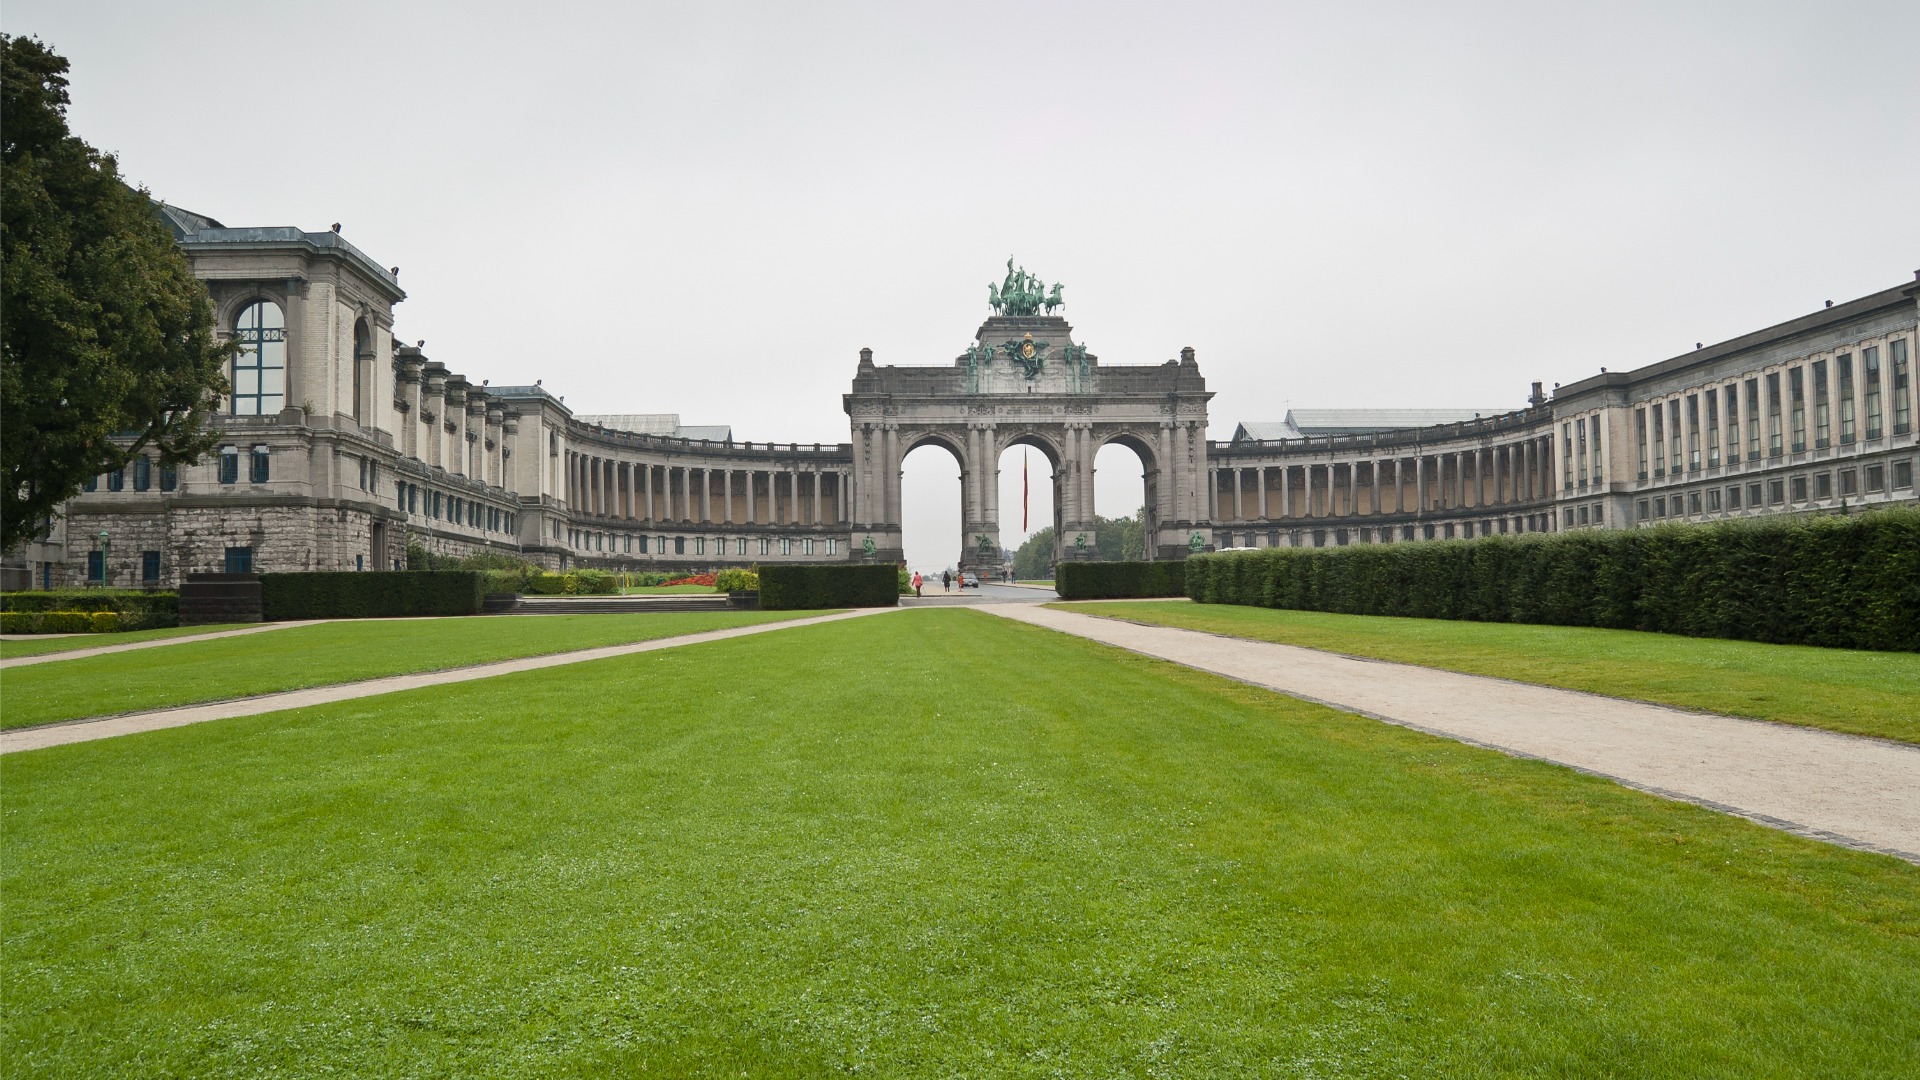 This image shows a magnificent arch in the background and a green space in the foreground. 